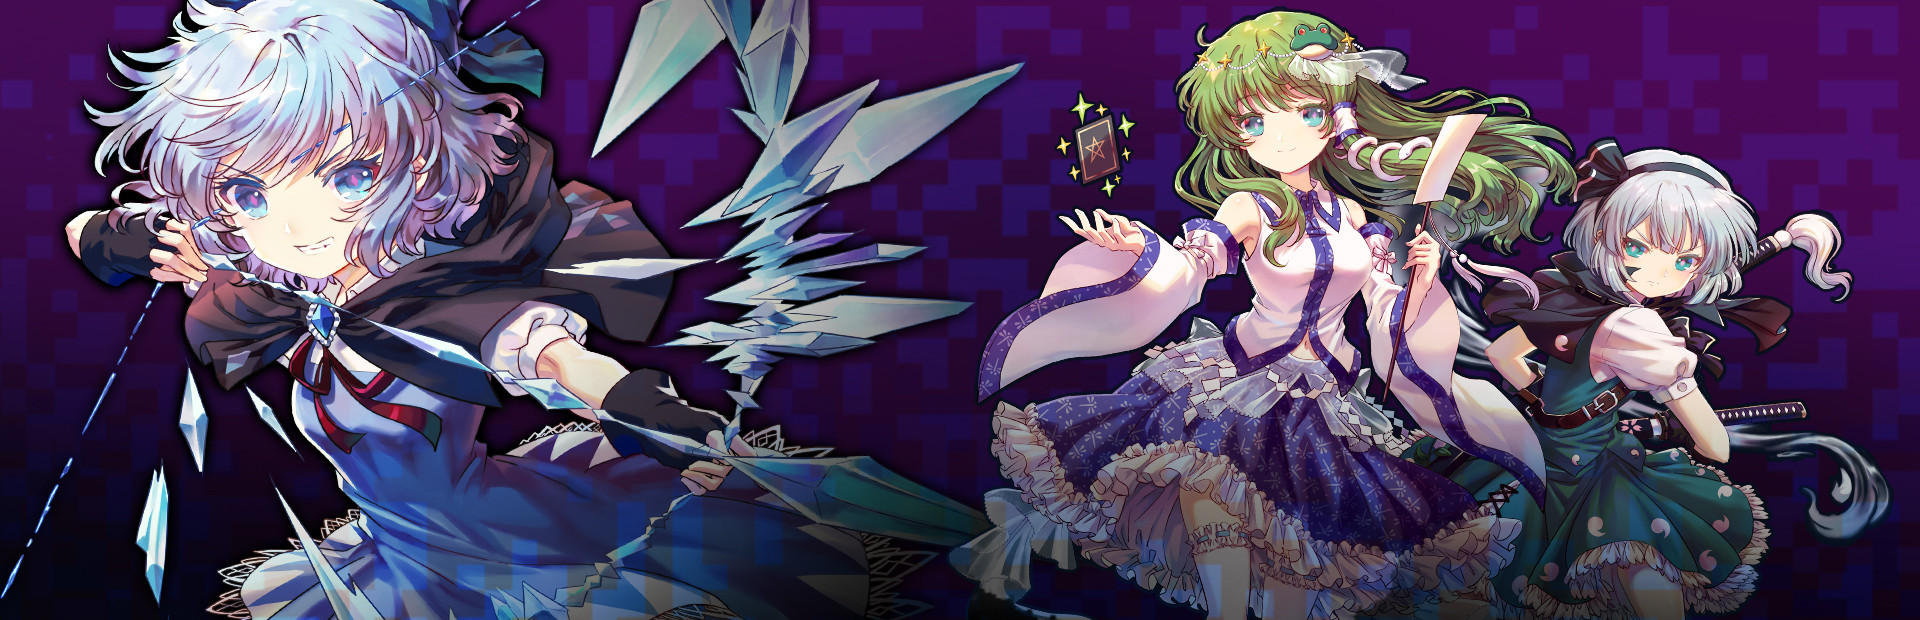 Touhou Blooming Chaos 2 cover image